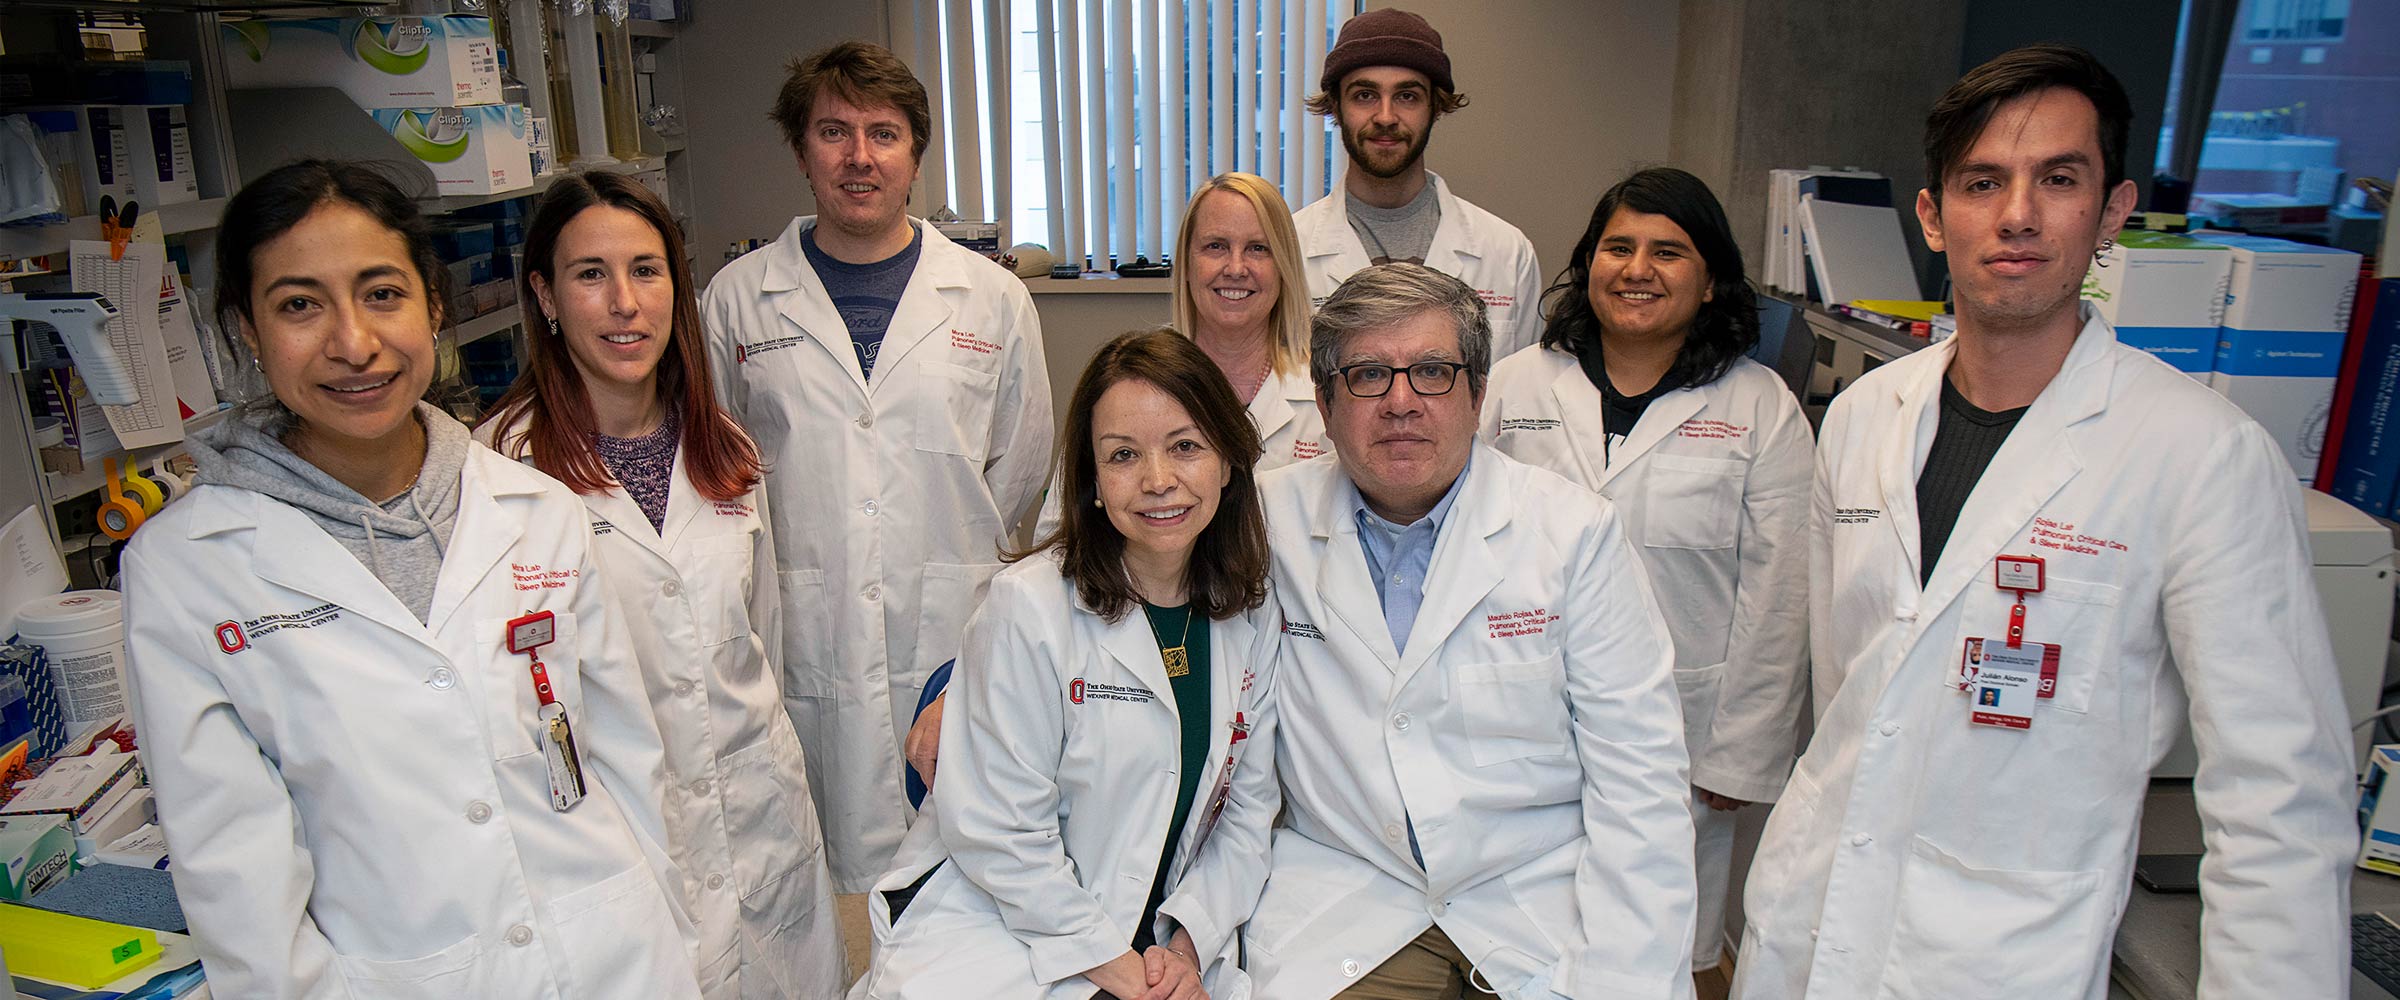 Mauricio Rojas, MD, and Ana Mora, MD, with their team in their lab at Ohio State